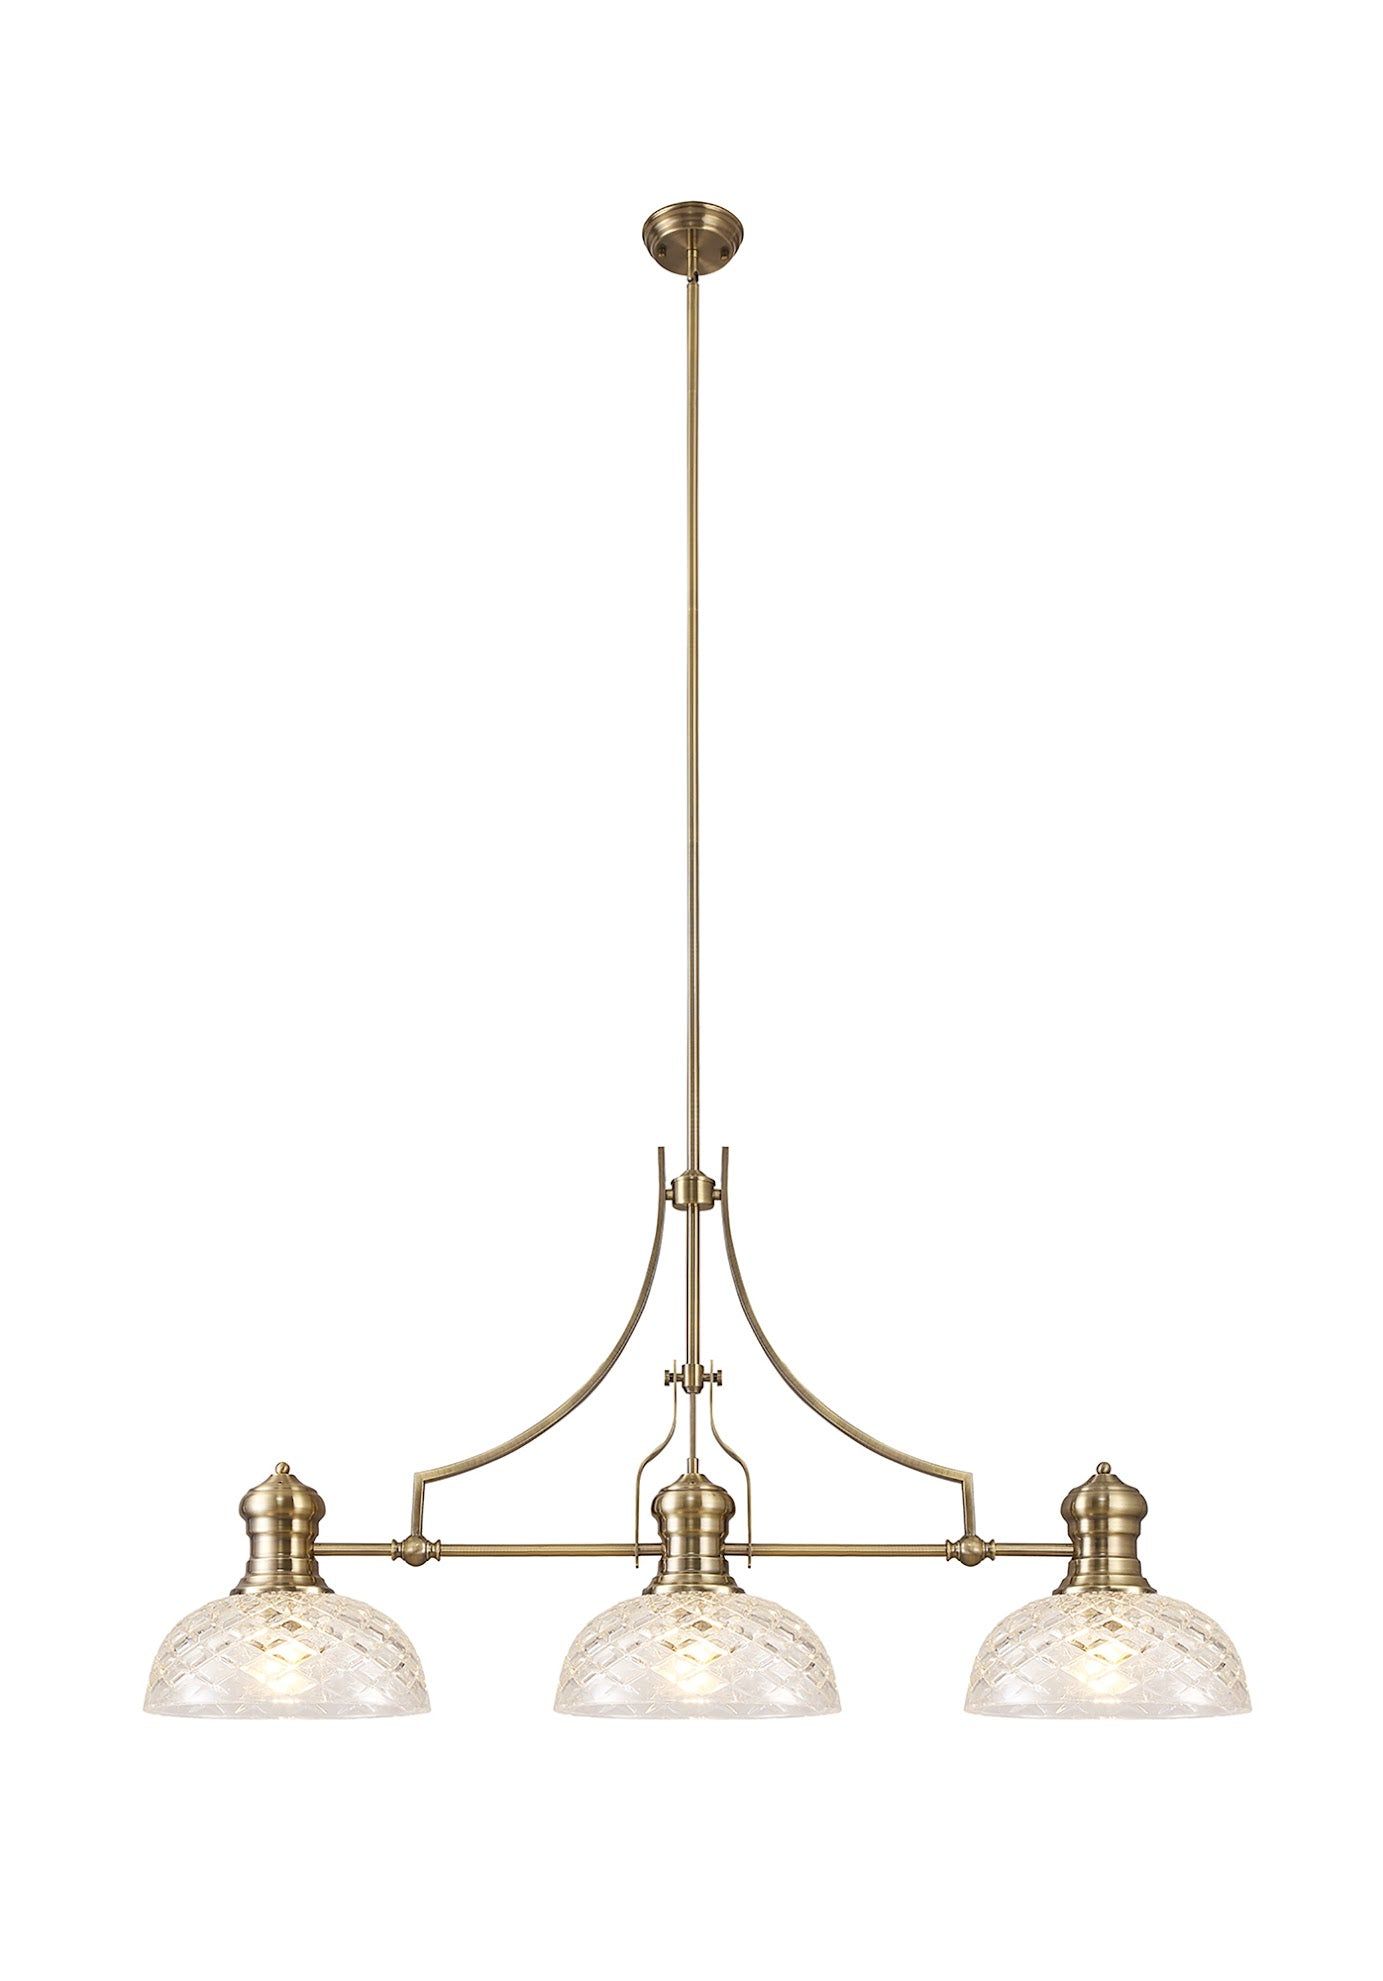 Savannah Linear Pendant With 30cm Flat Round Patterned Shade, 3 x E27, Antique Brass/Clear Glass